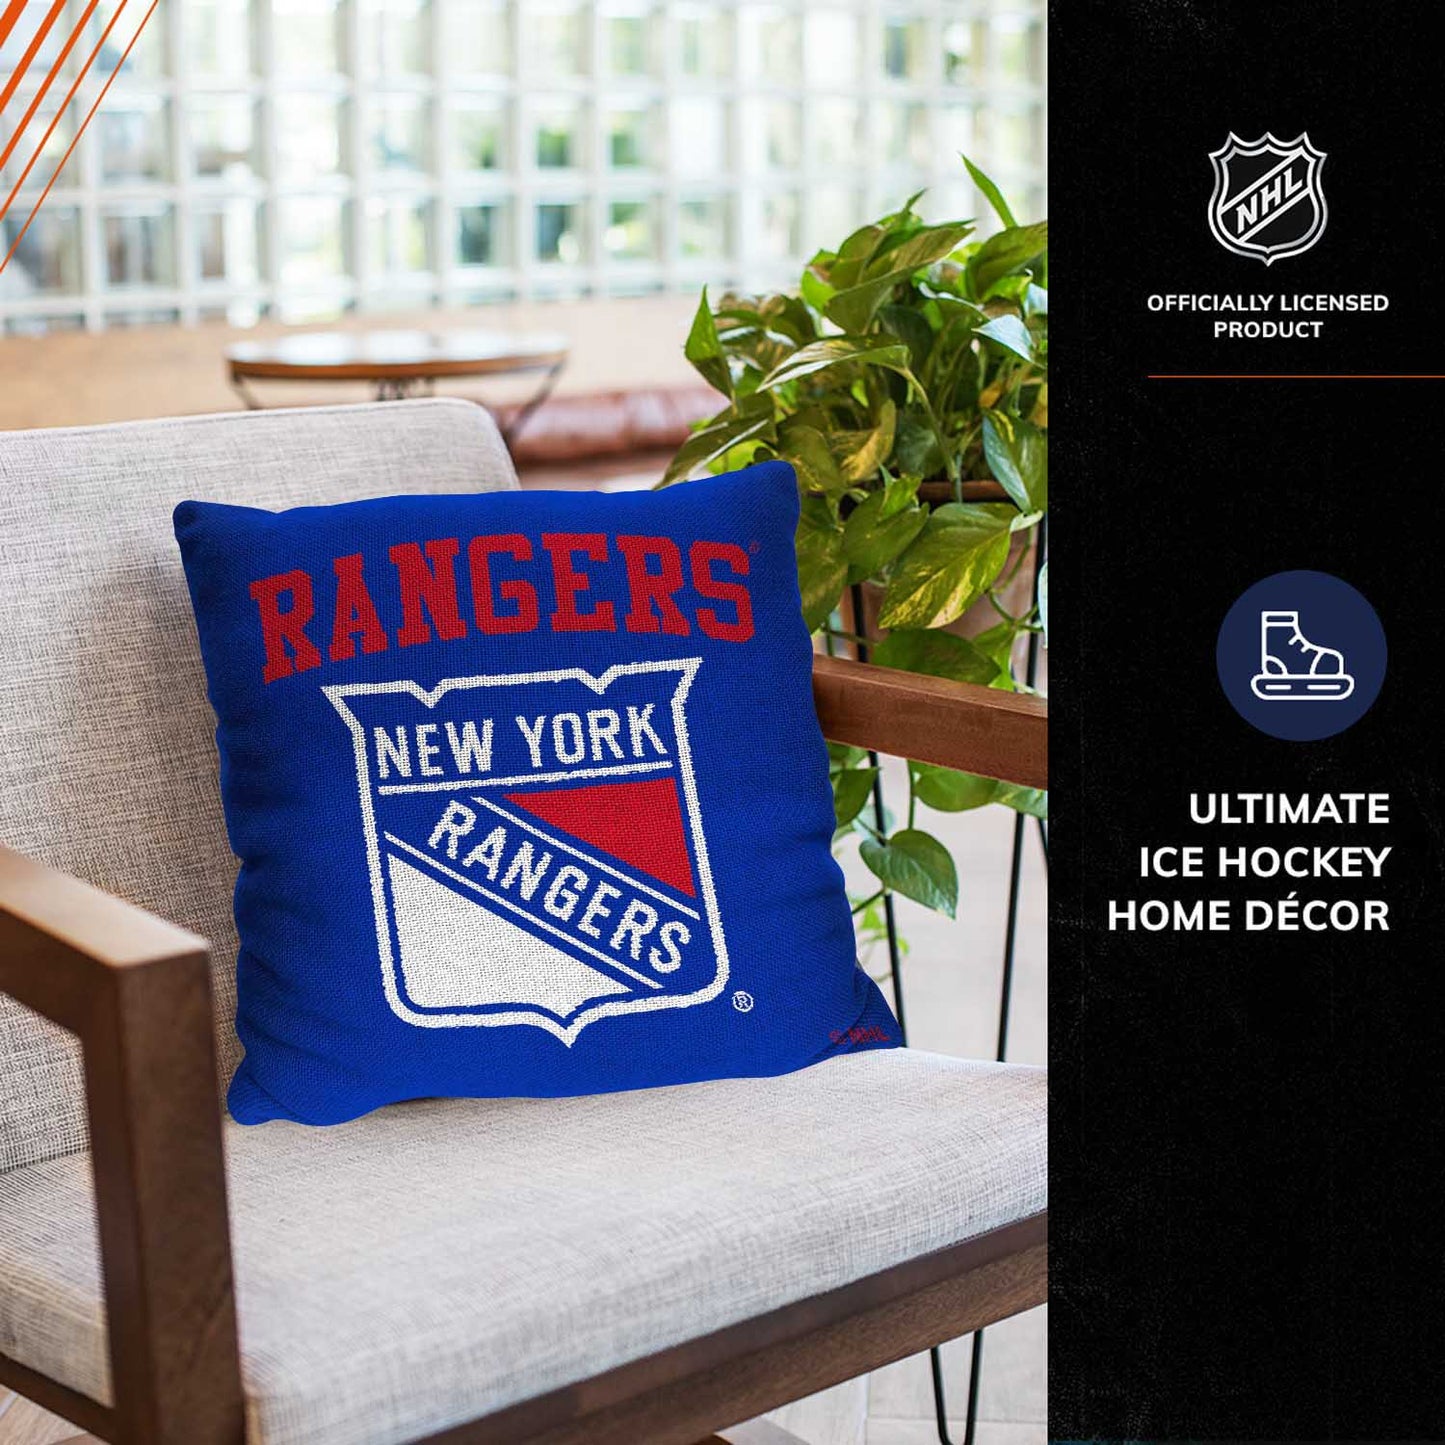 New York Rangers NHL Decorative Pillows- Enhance Your Space with Woven Throw Pillows - Blue